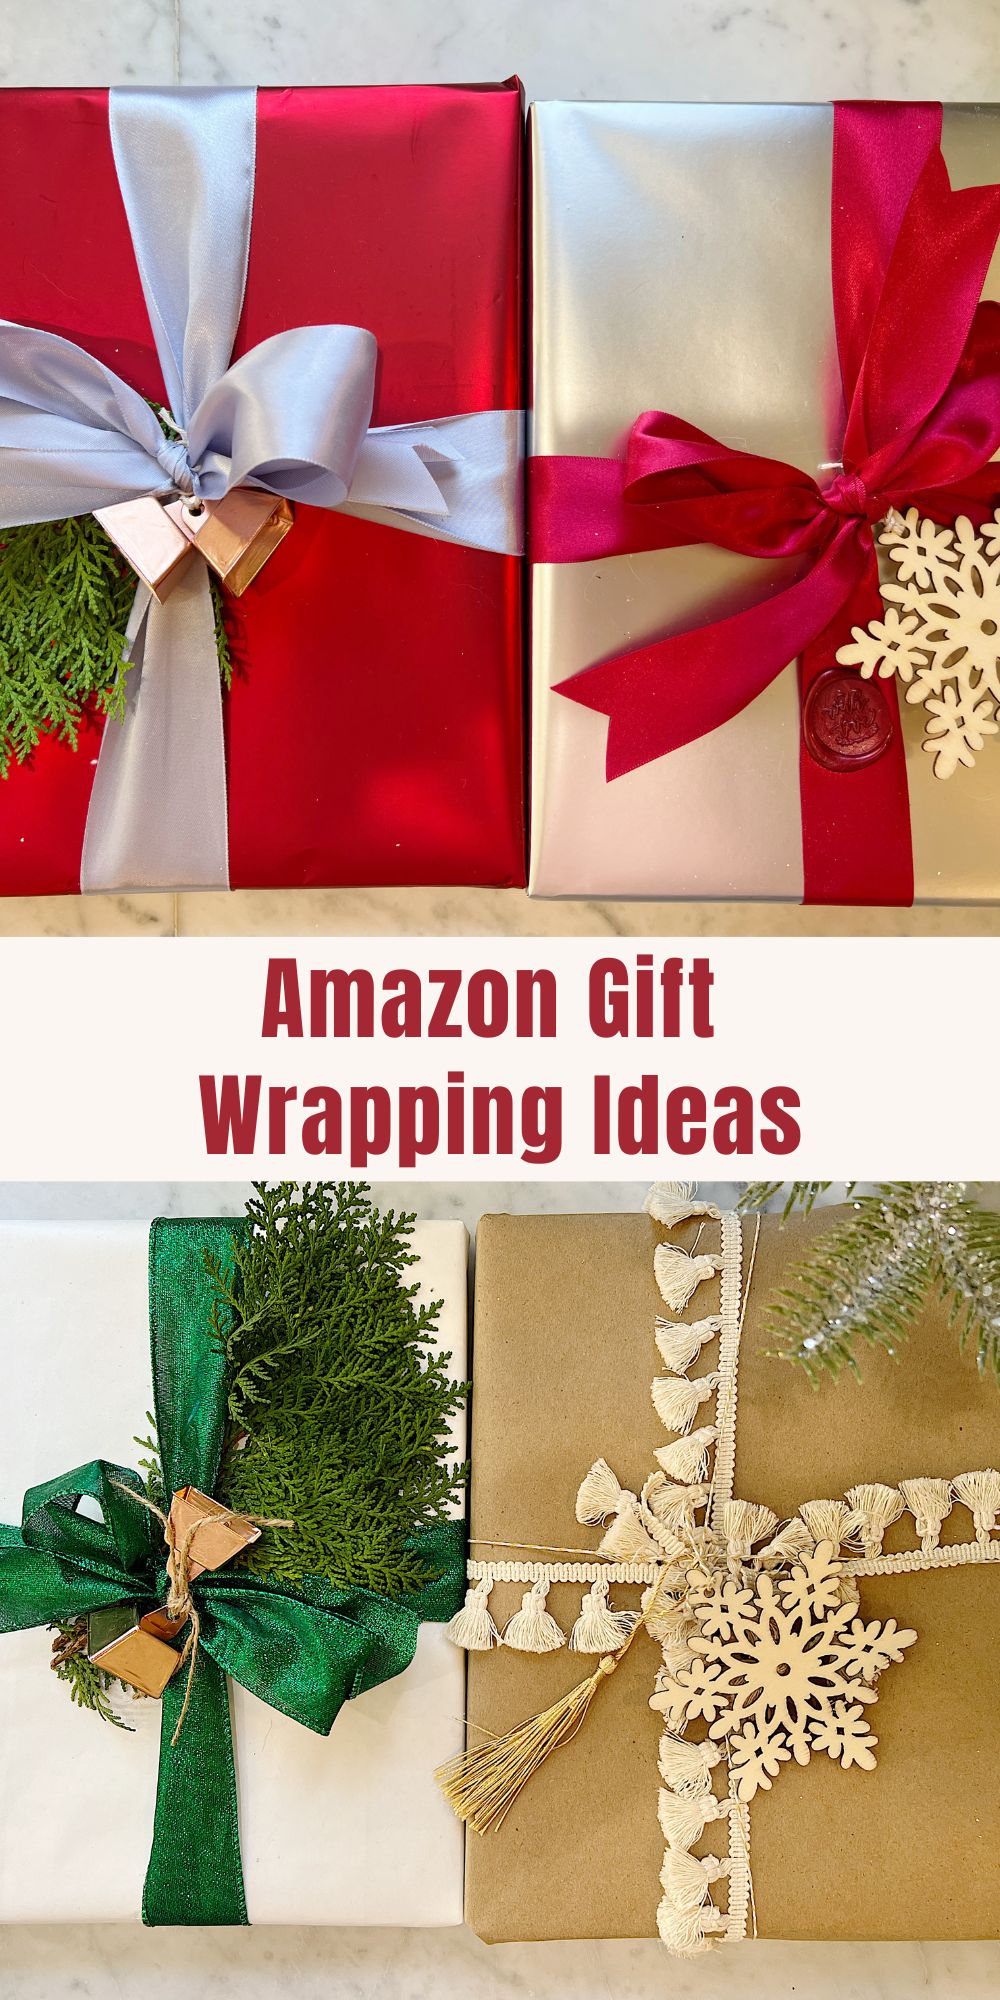 I am sharing all of my Amazon gift wrap ideas with you today so that you can get a head start on your Christmas wrapping too!